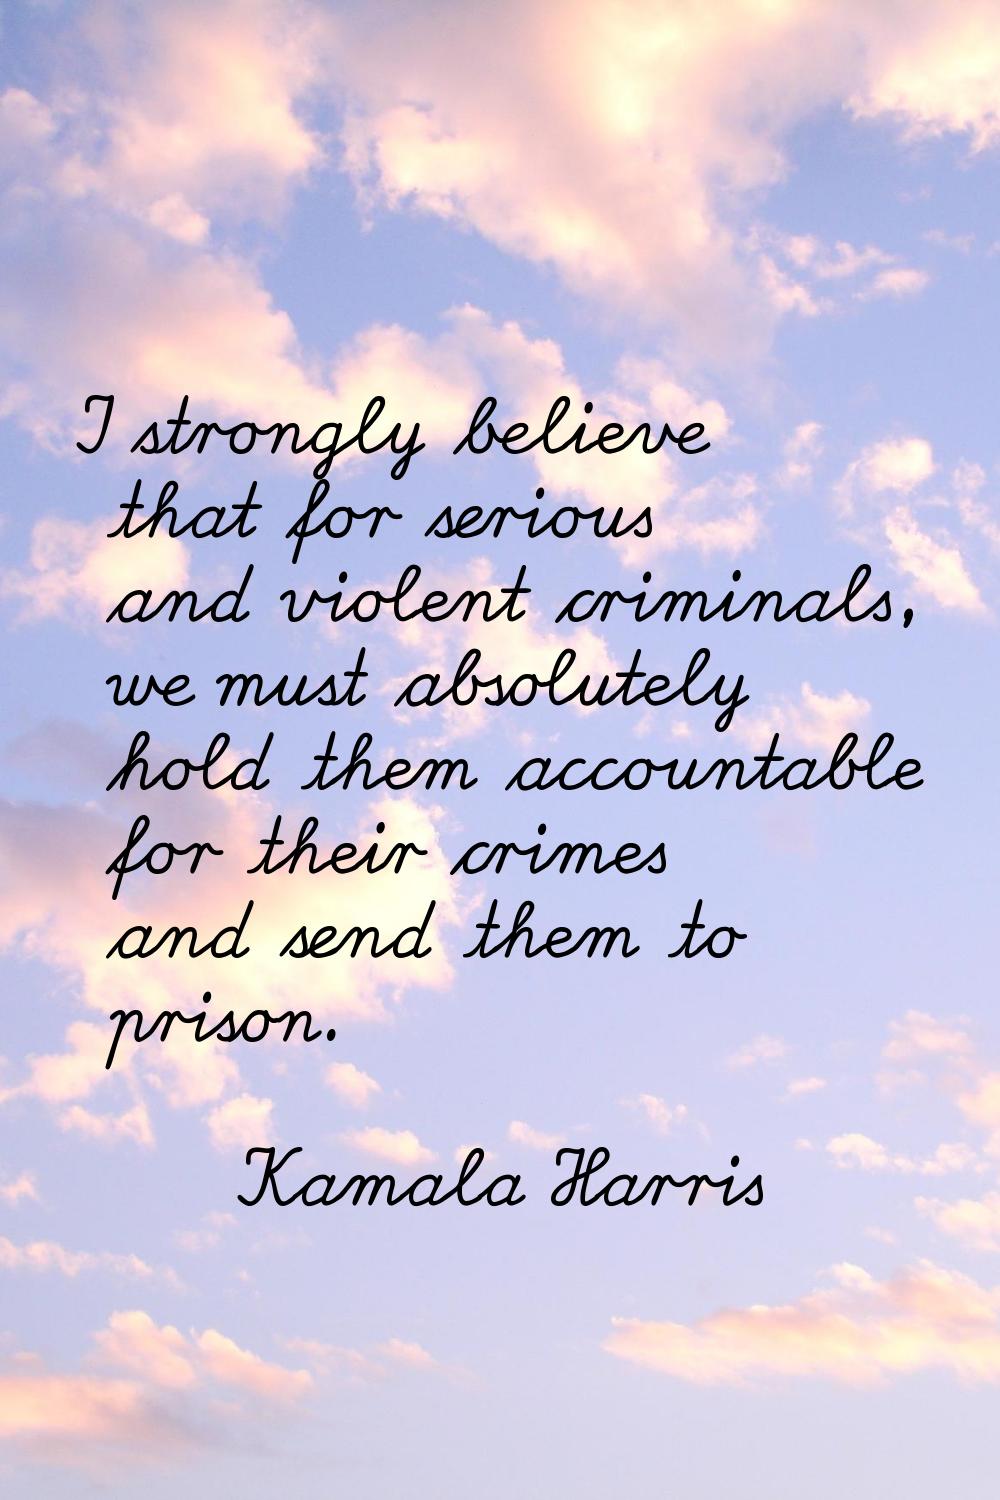 I strongly believe that for serious and violent criminals, we must absolutely hold them accountable